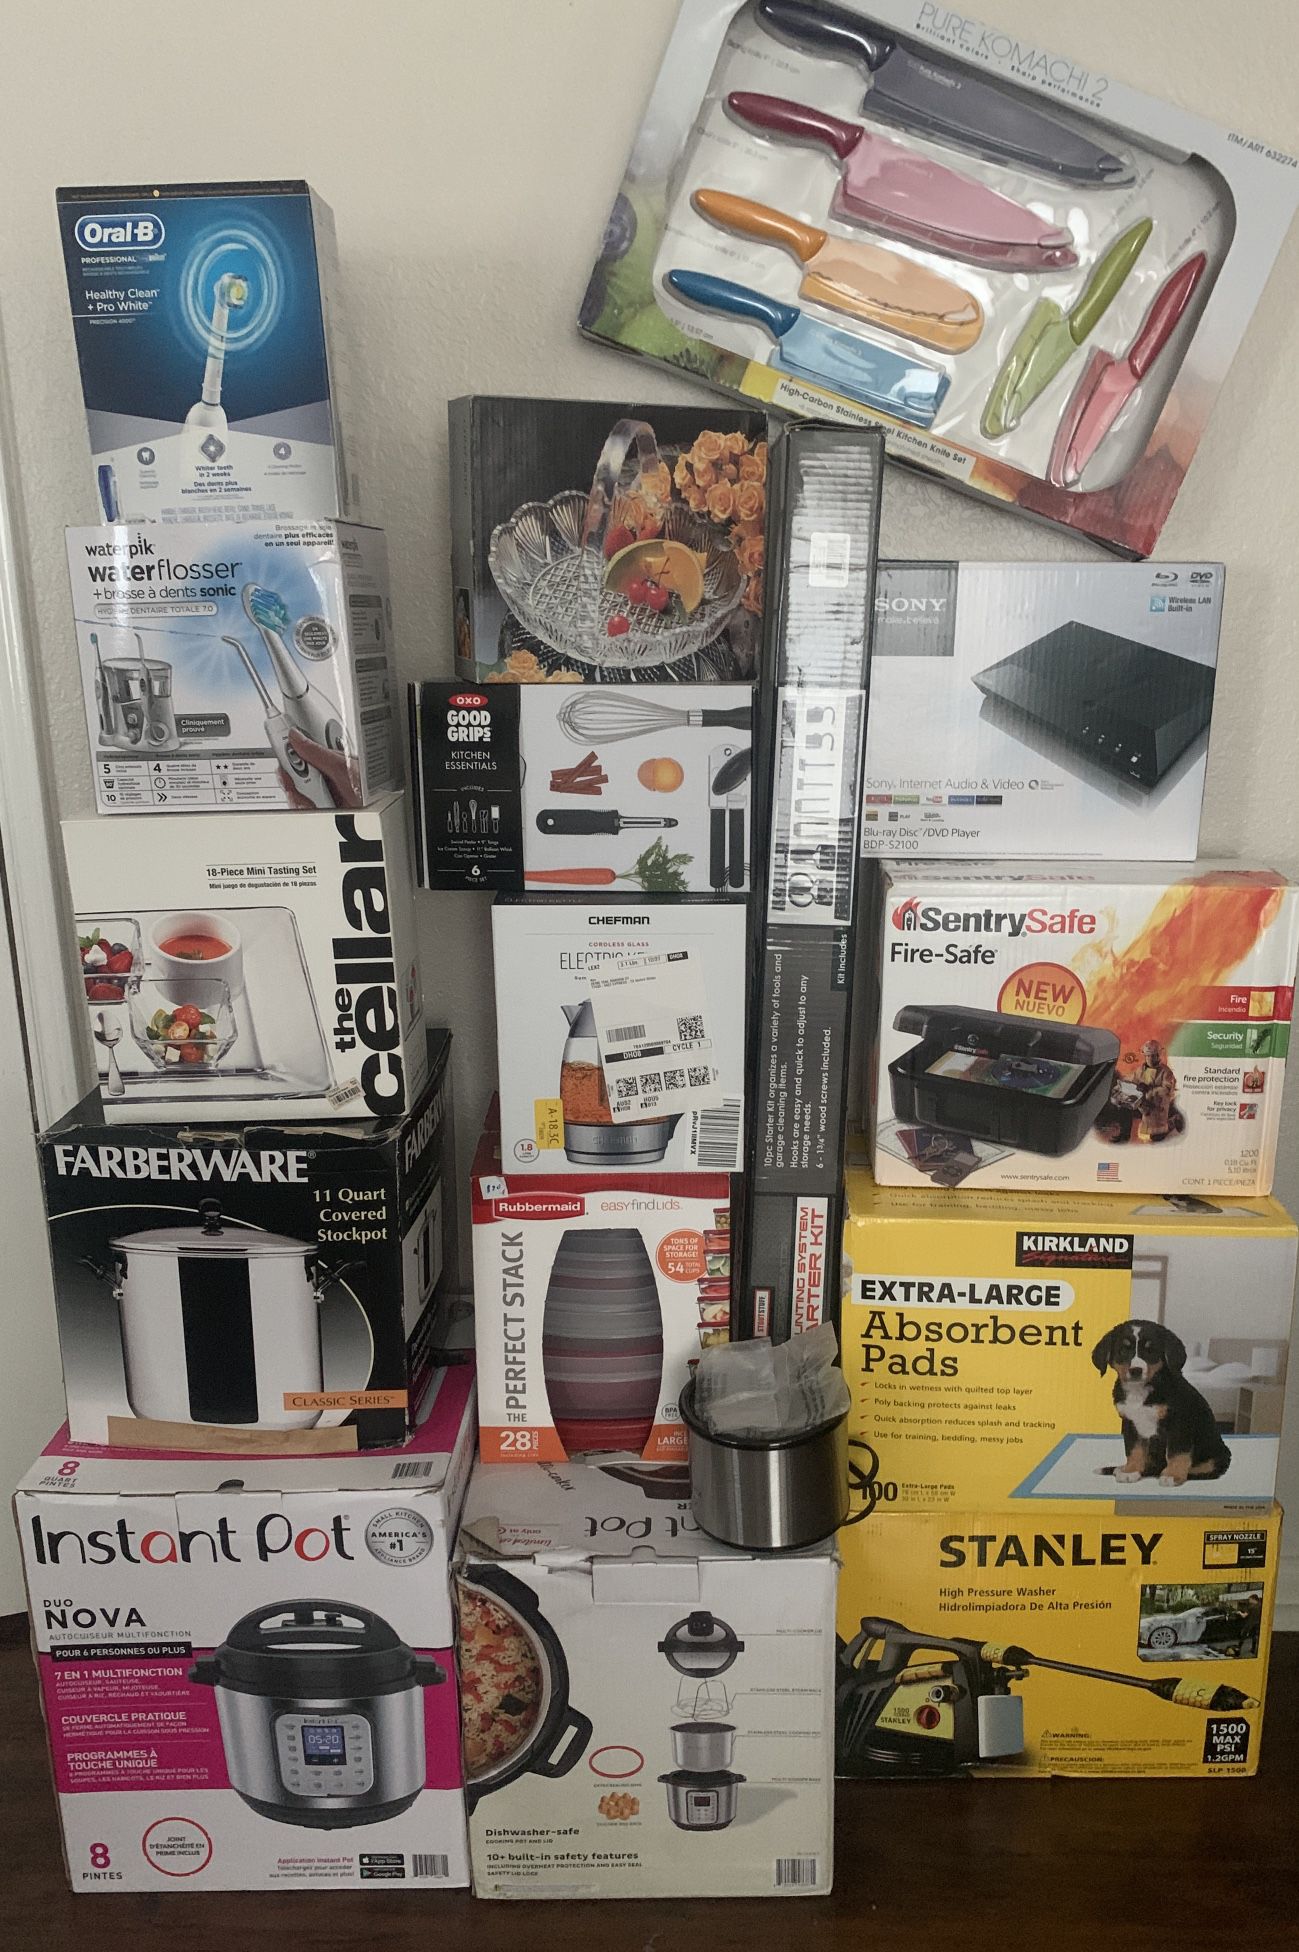 New Home Goods Appliances. Instant pot; electric kettle, Sifter